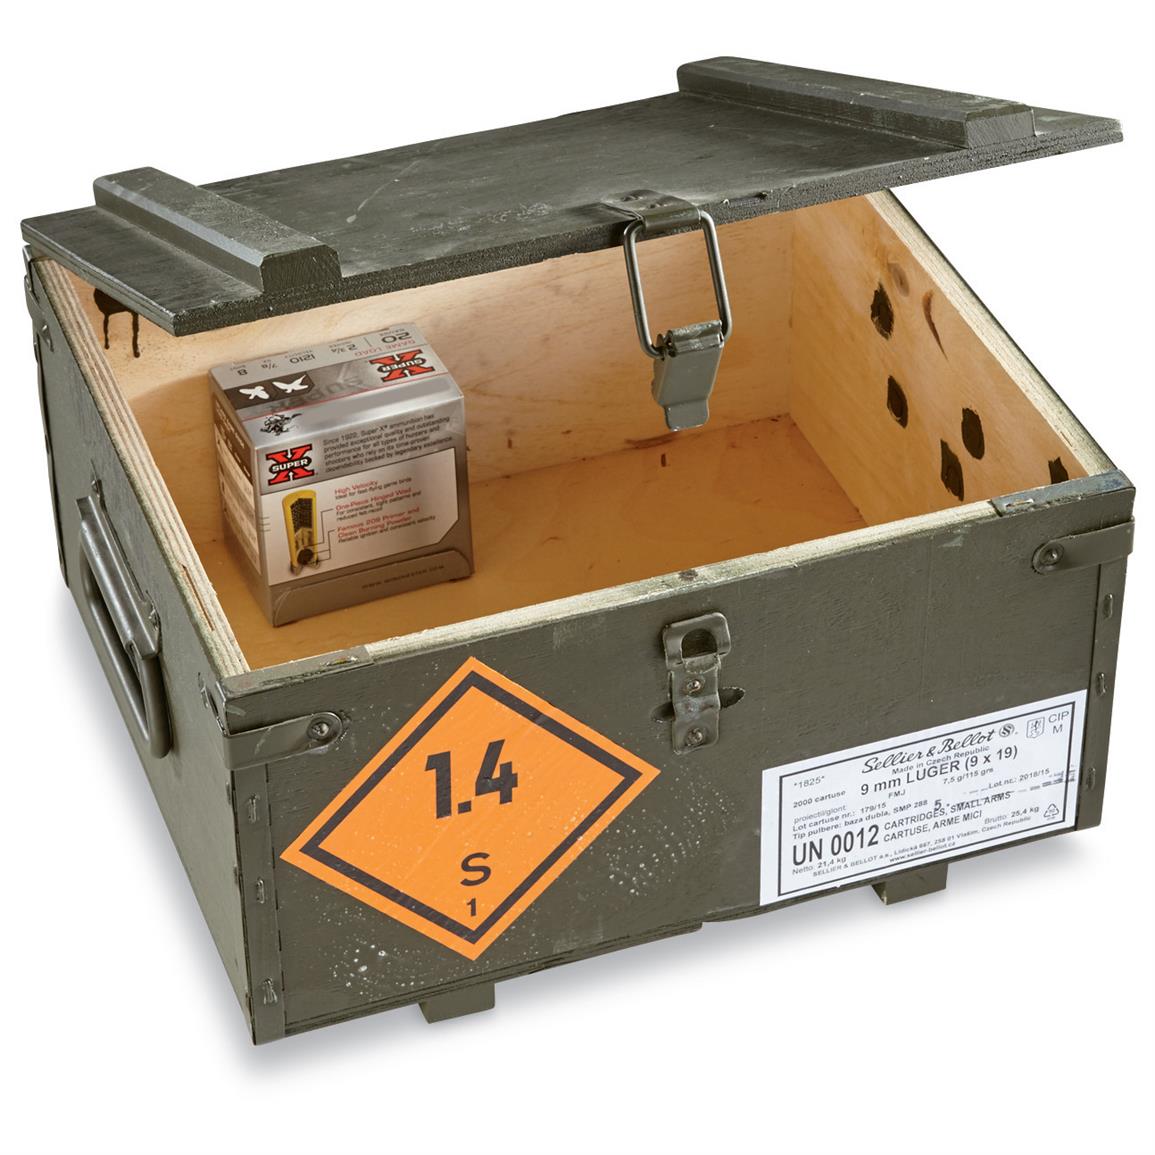 Czech Military Surplus Wooden Ammo Crate, Like New ...